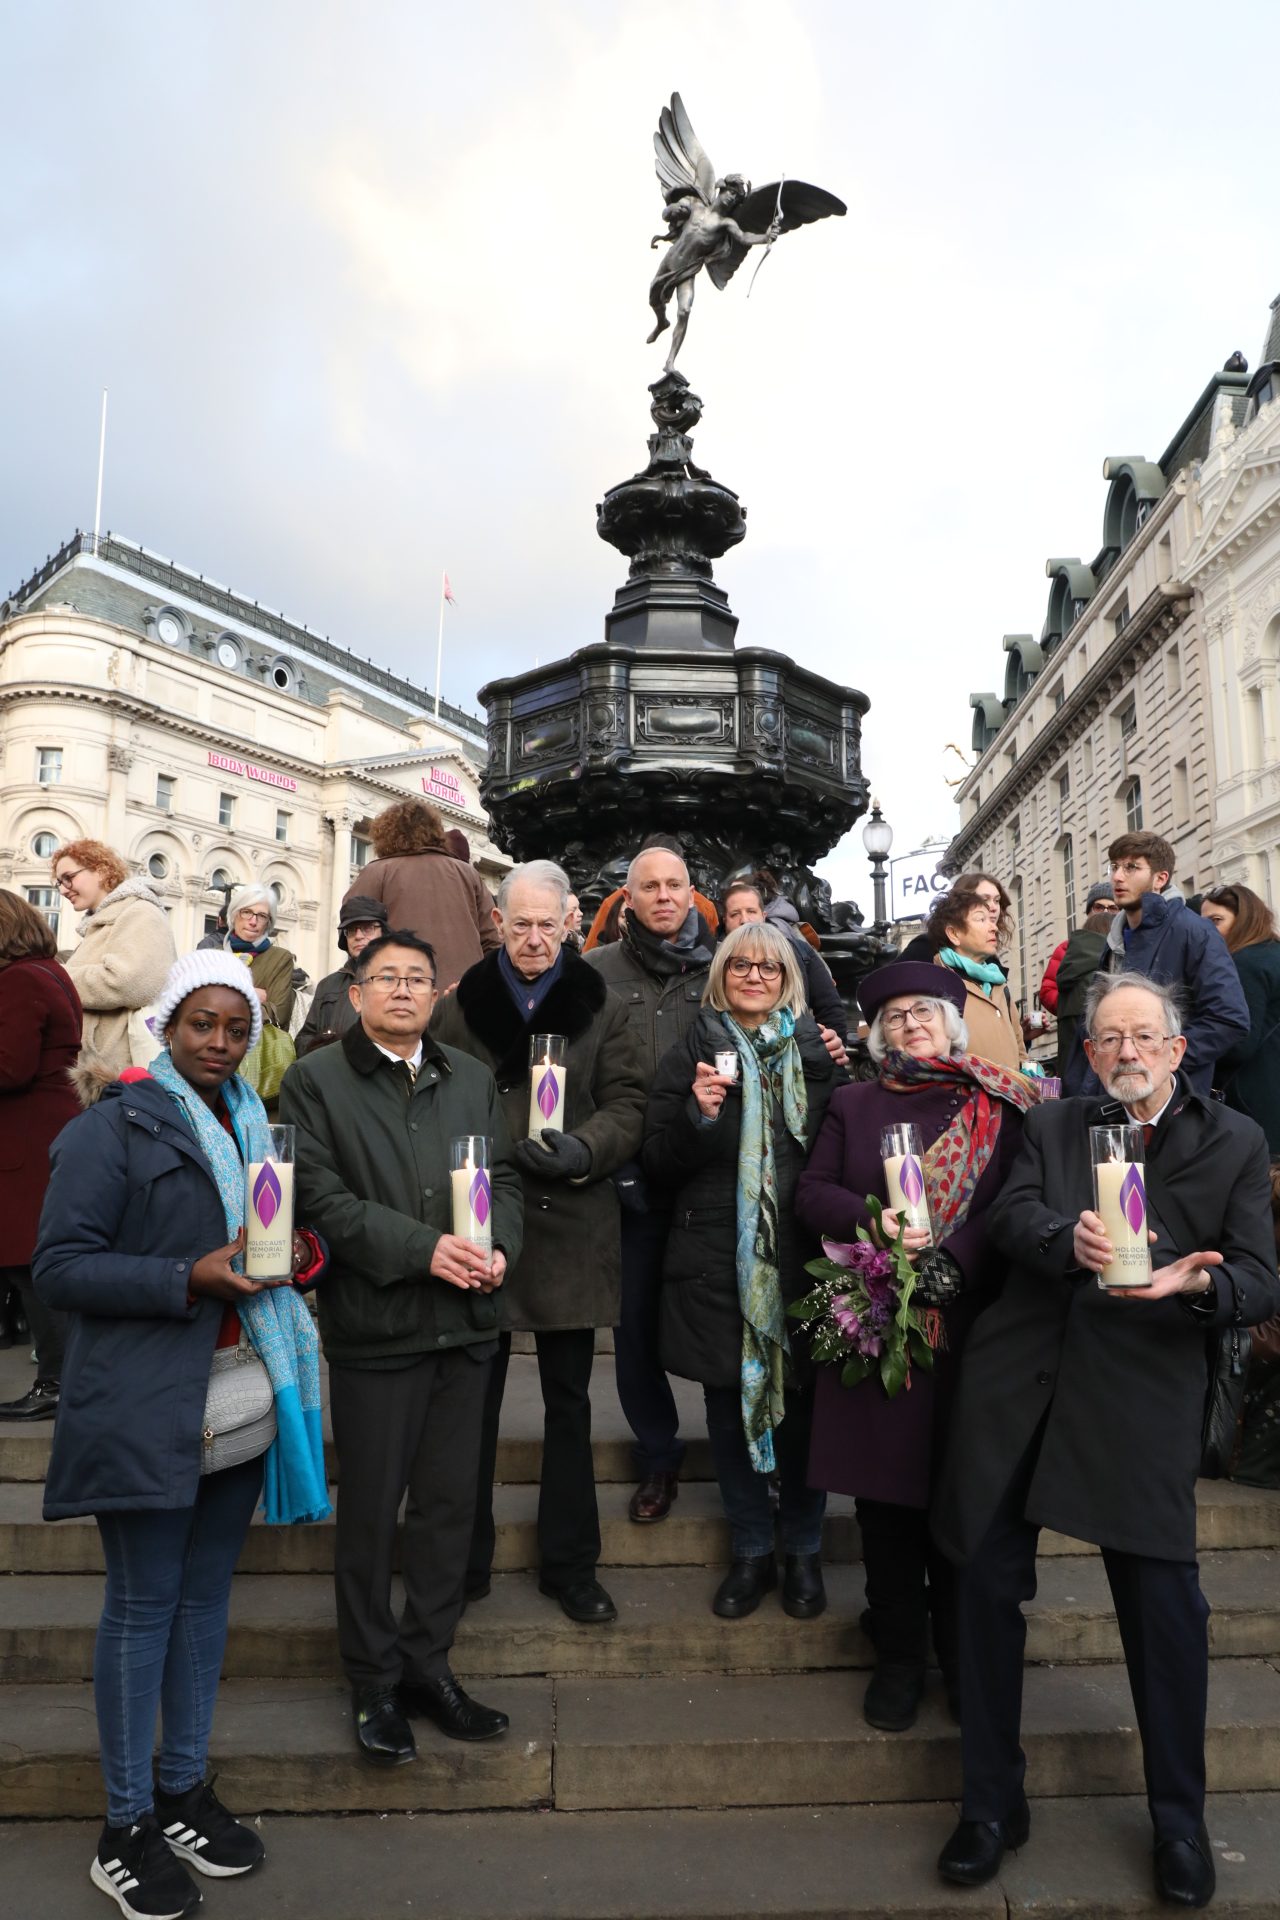 Antoinette Mutabazi, Sokphal Din BEM, John Hajdu MBE, Rob Rinder, Laura Marks OBE, Joan Salter MBE and Dr Martin Stern MBE Light the Darkness together in Piccadilly Circus